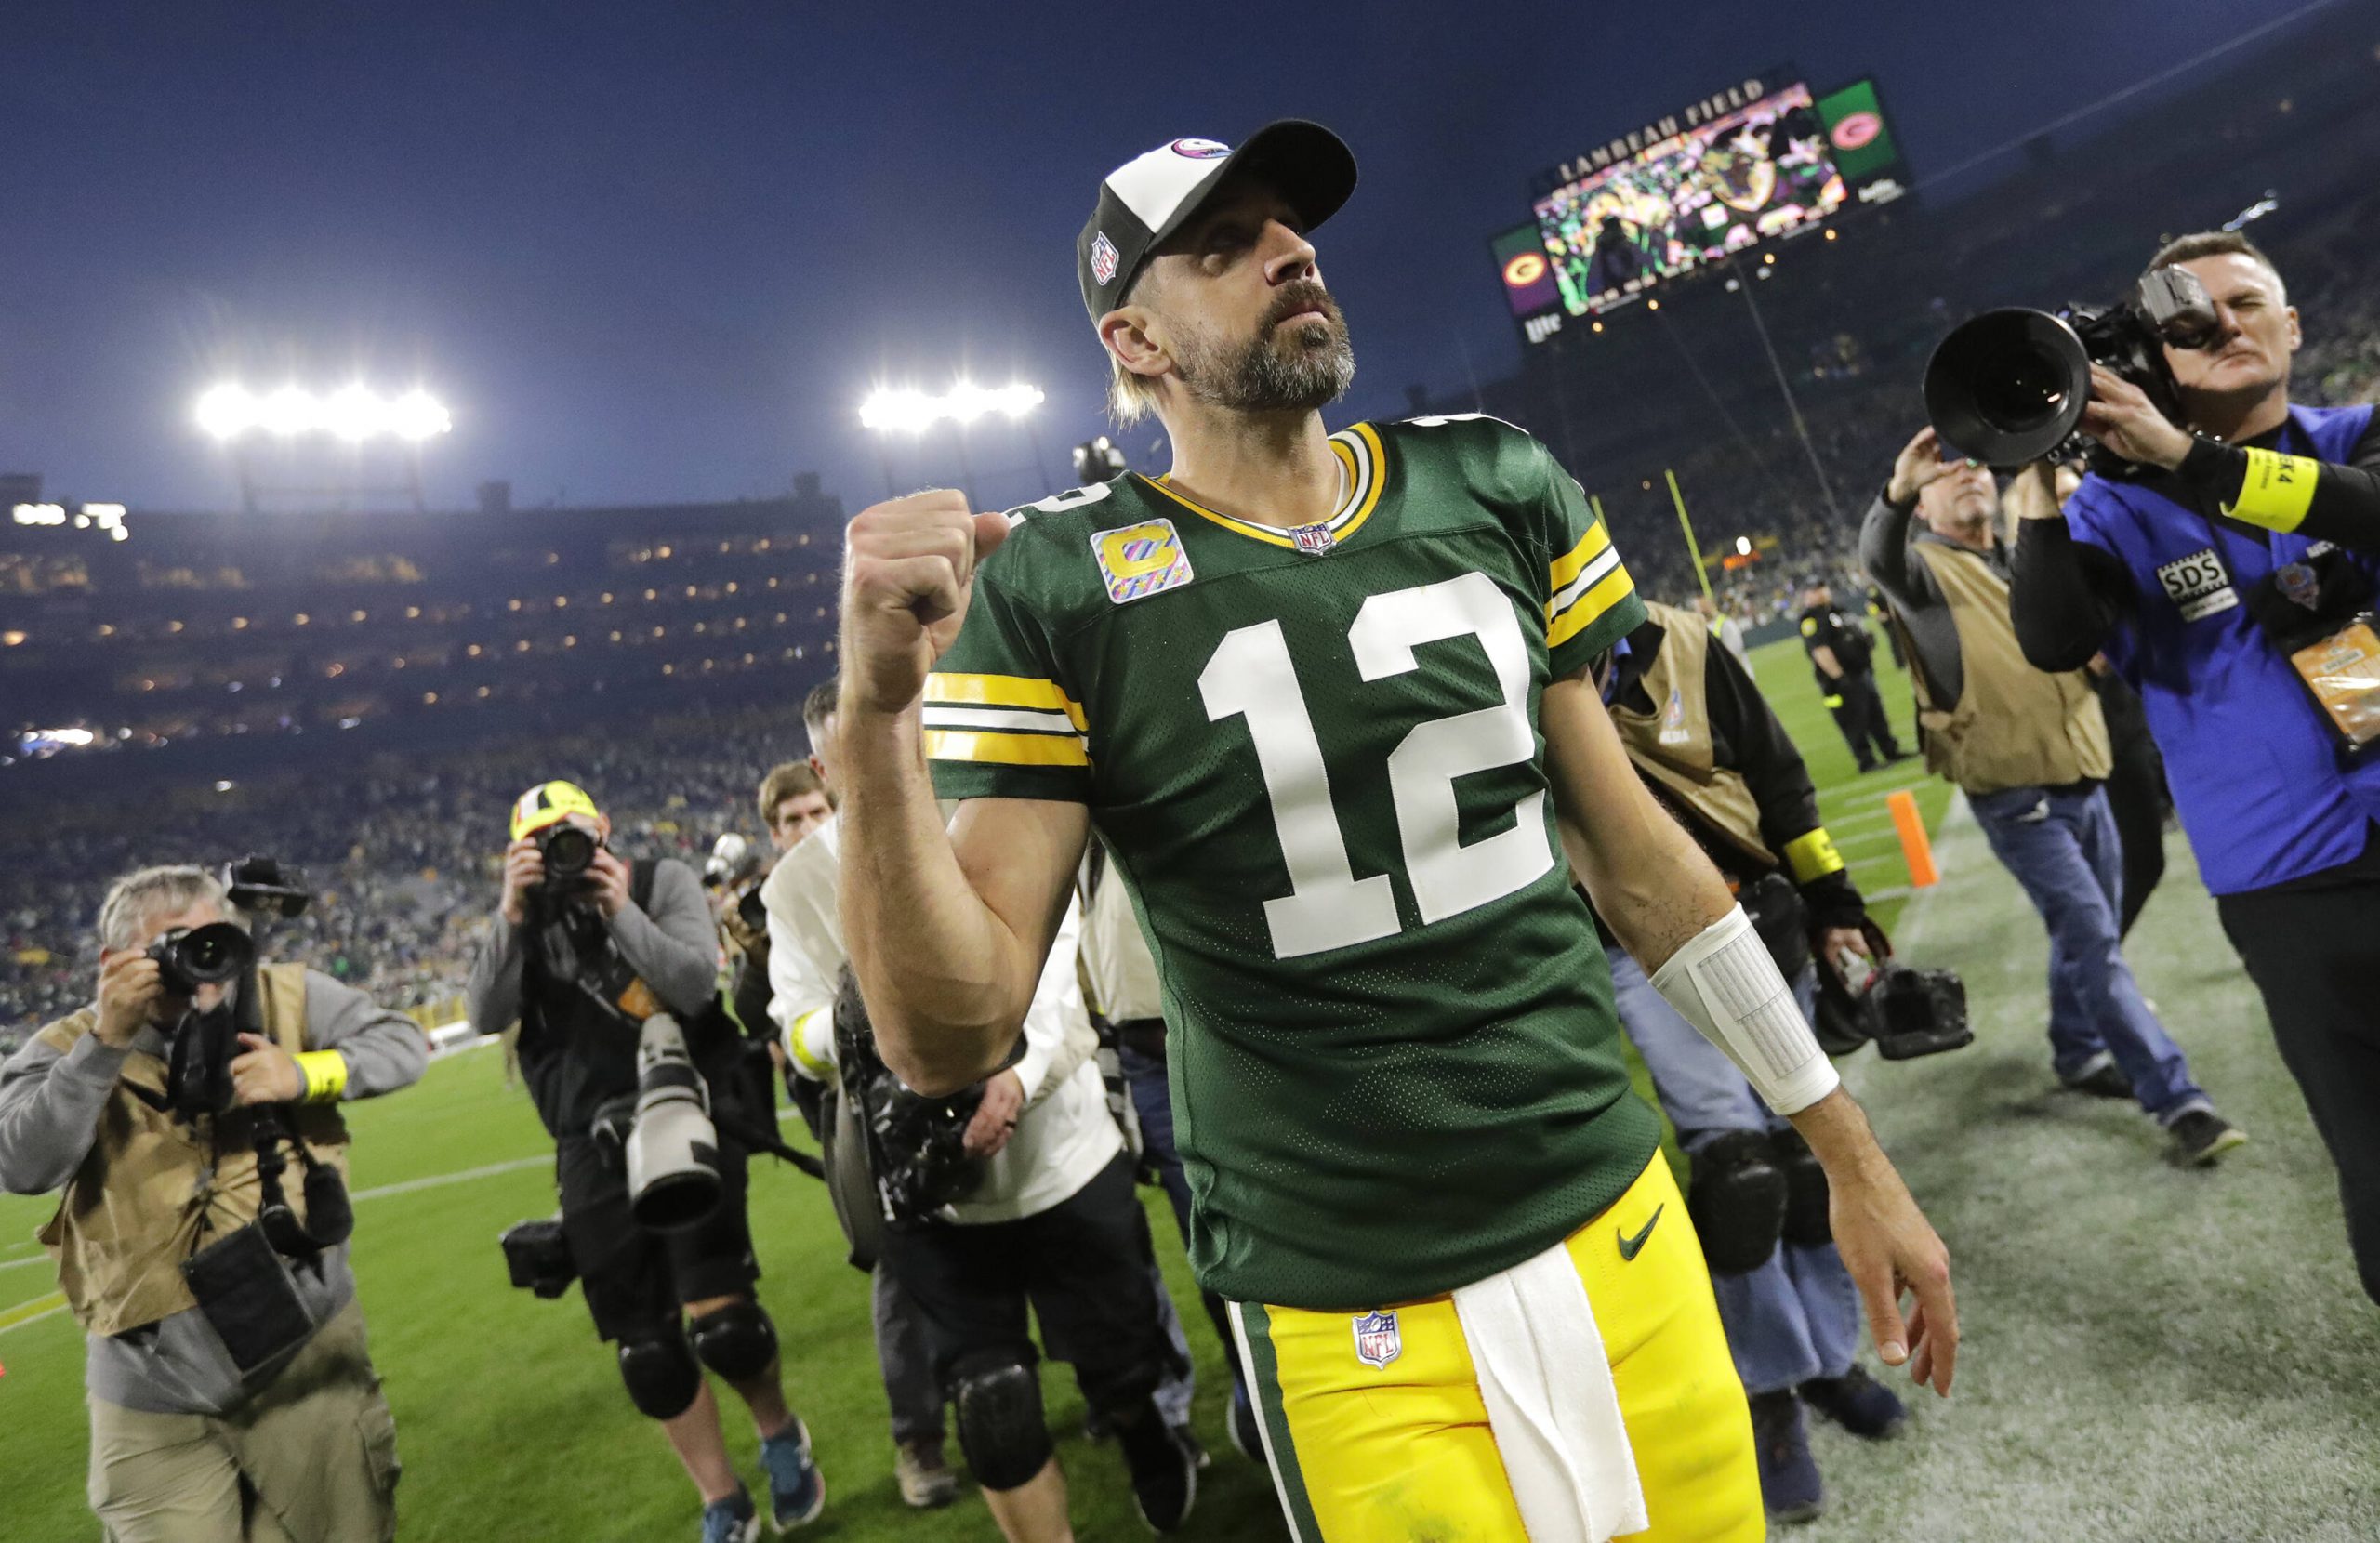 Aaron Rodgers, NFL, American Football Herren, USA New England Patriots at Green Bay Packers Oct 2, 2022 Green Bay, WI, USA Green Bay Packers quarterback Aaron Rodgers 12 celebrates defeating the New England Patriots in overtime as he leaves the field Sunday, October 2, at Lambeau Field in Green Bay, Wis. Green Bay Wisconsin USA, EDITORIAL USE ONLY PUBLICATIONxINxGERxSUIxAUTxONLY Copyright: xDanxPowersx 20221002_jla_usa_144